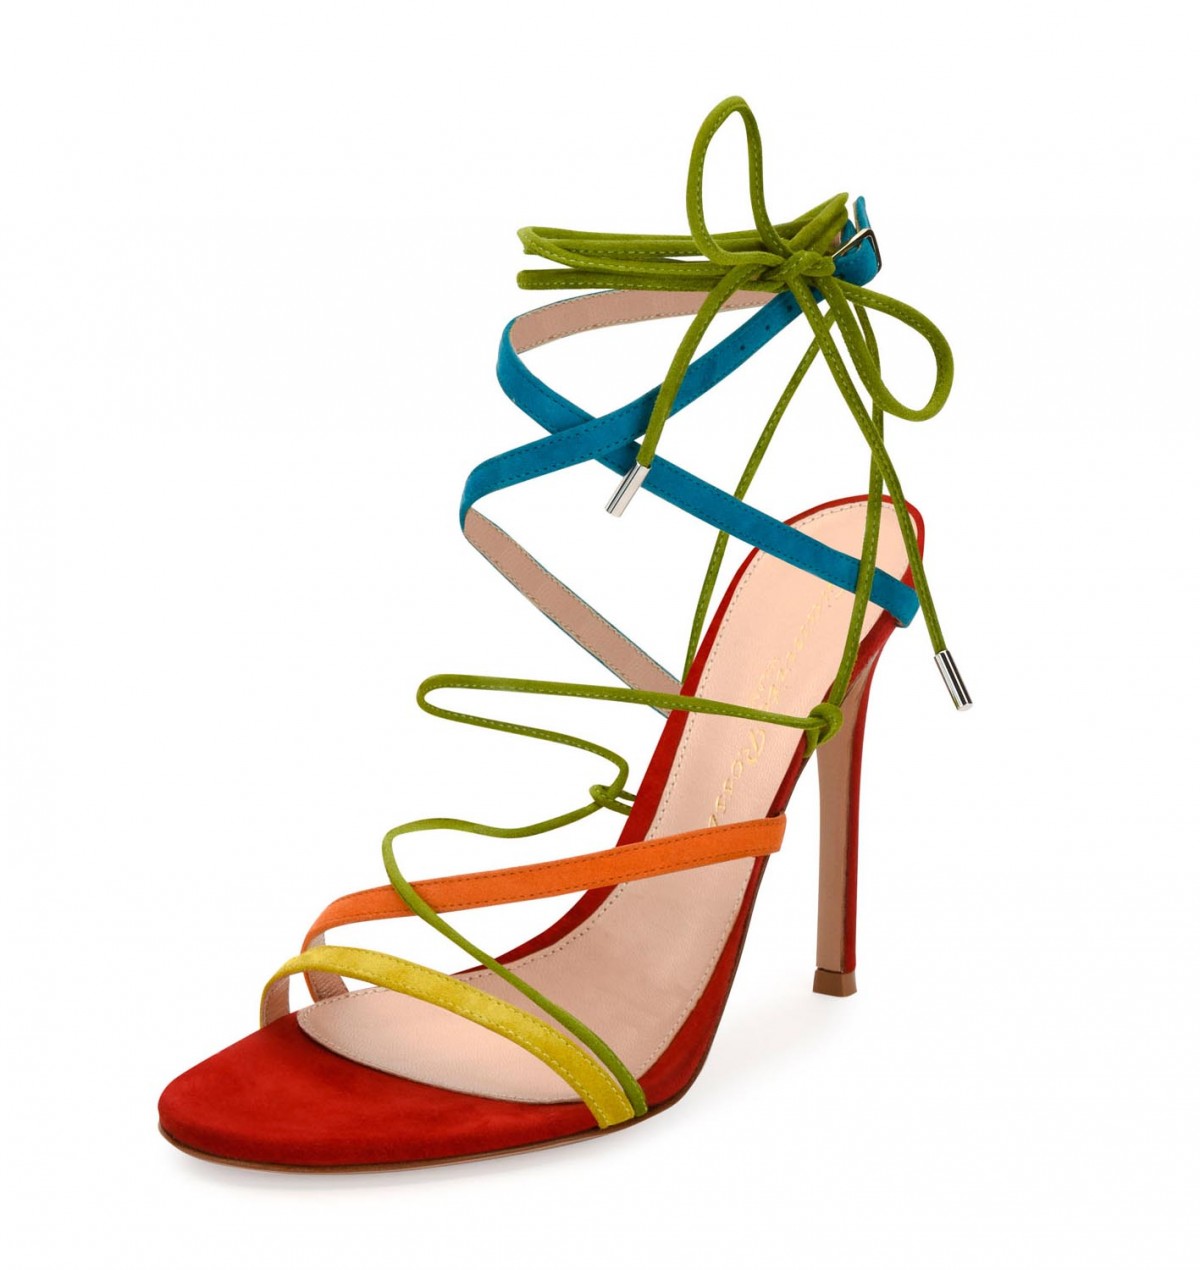 Gianvito Rossi Strappy Suede 105mm Sandal, Multi – Shoes Post